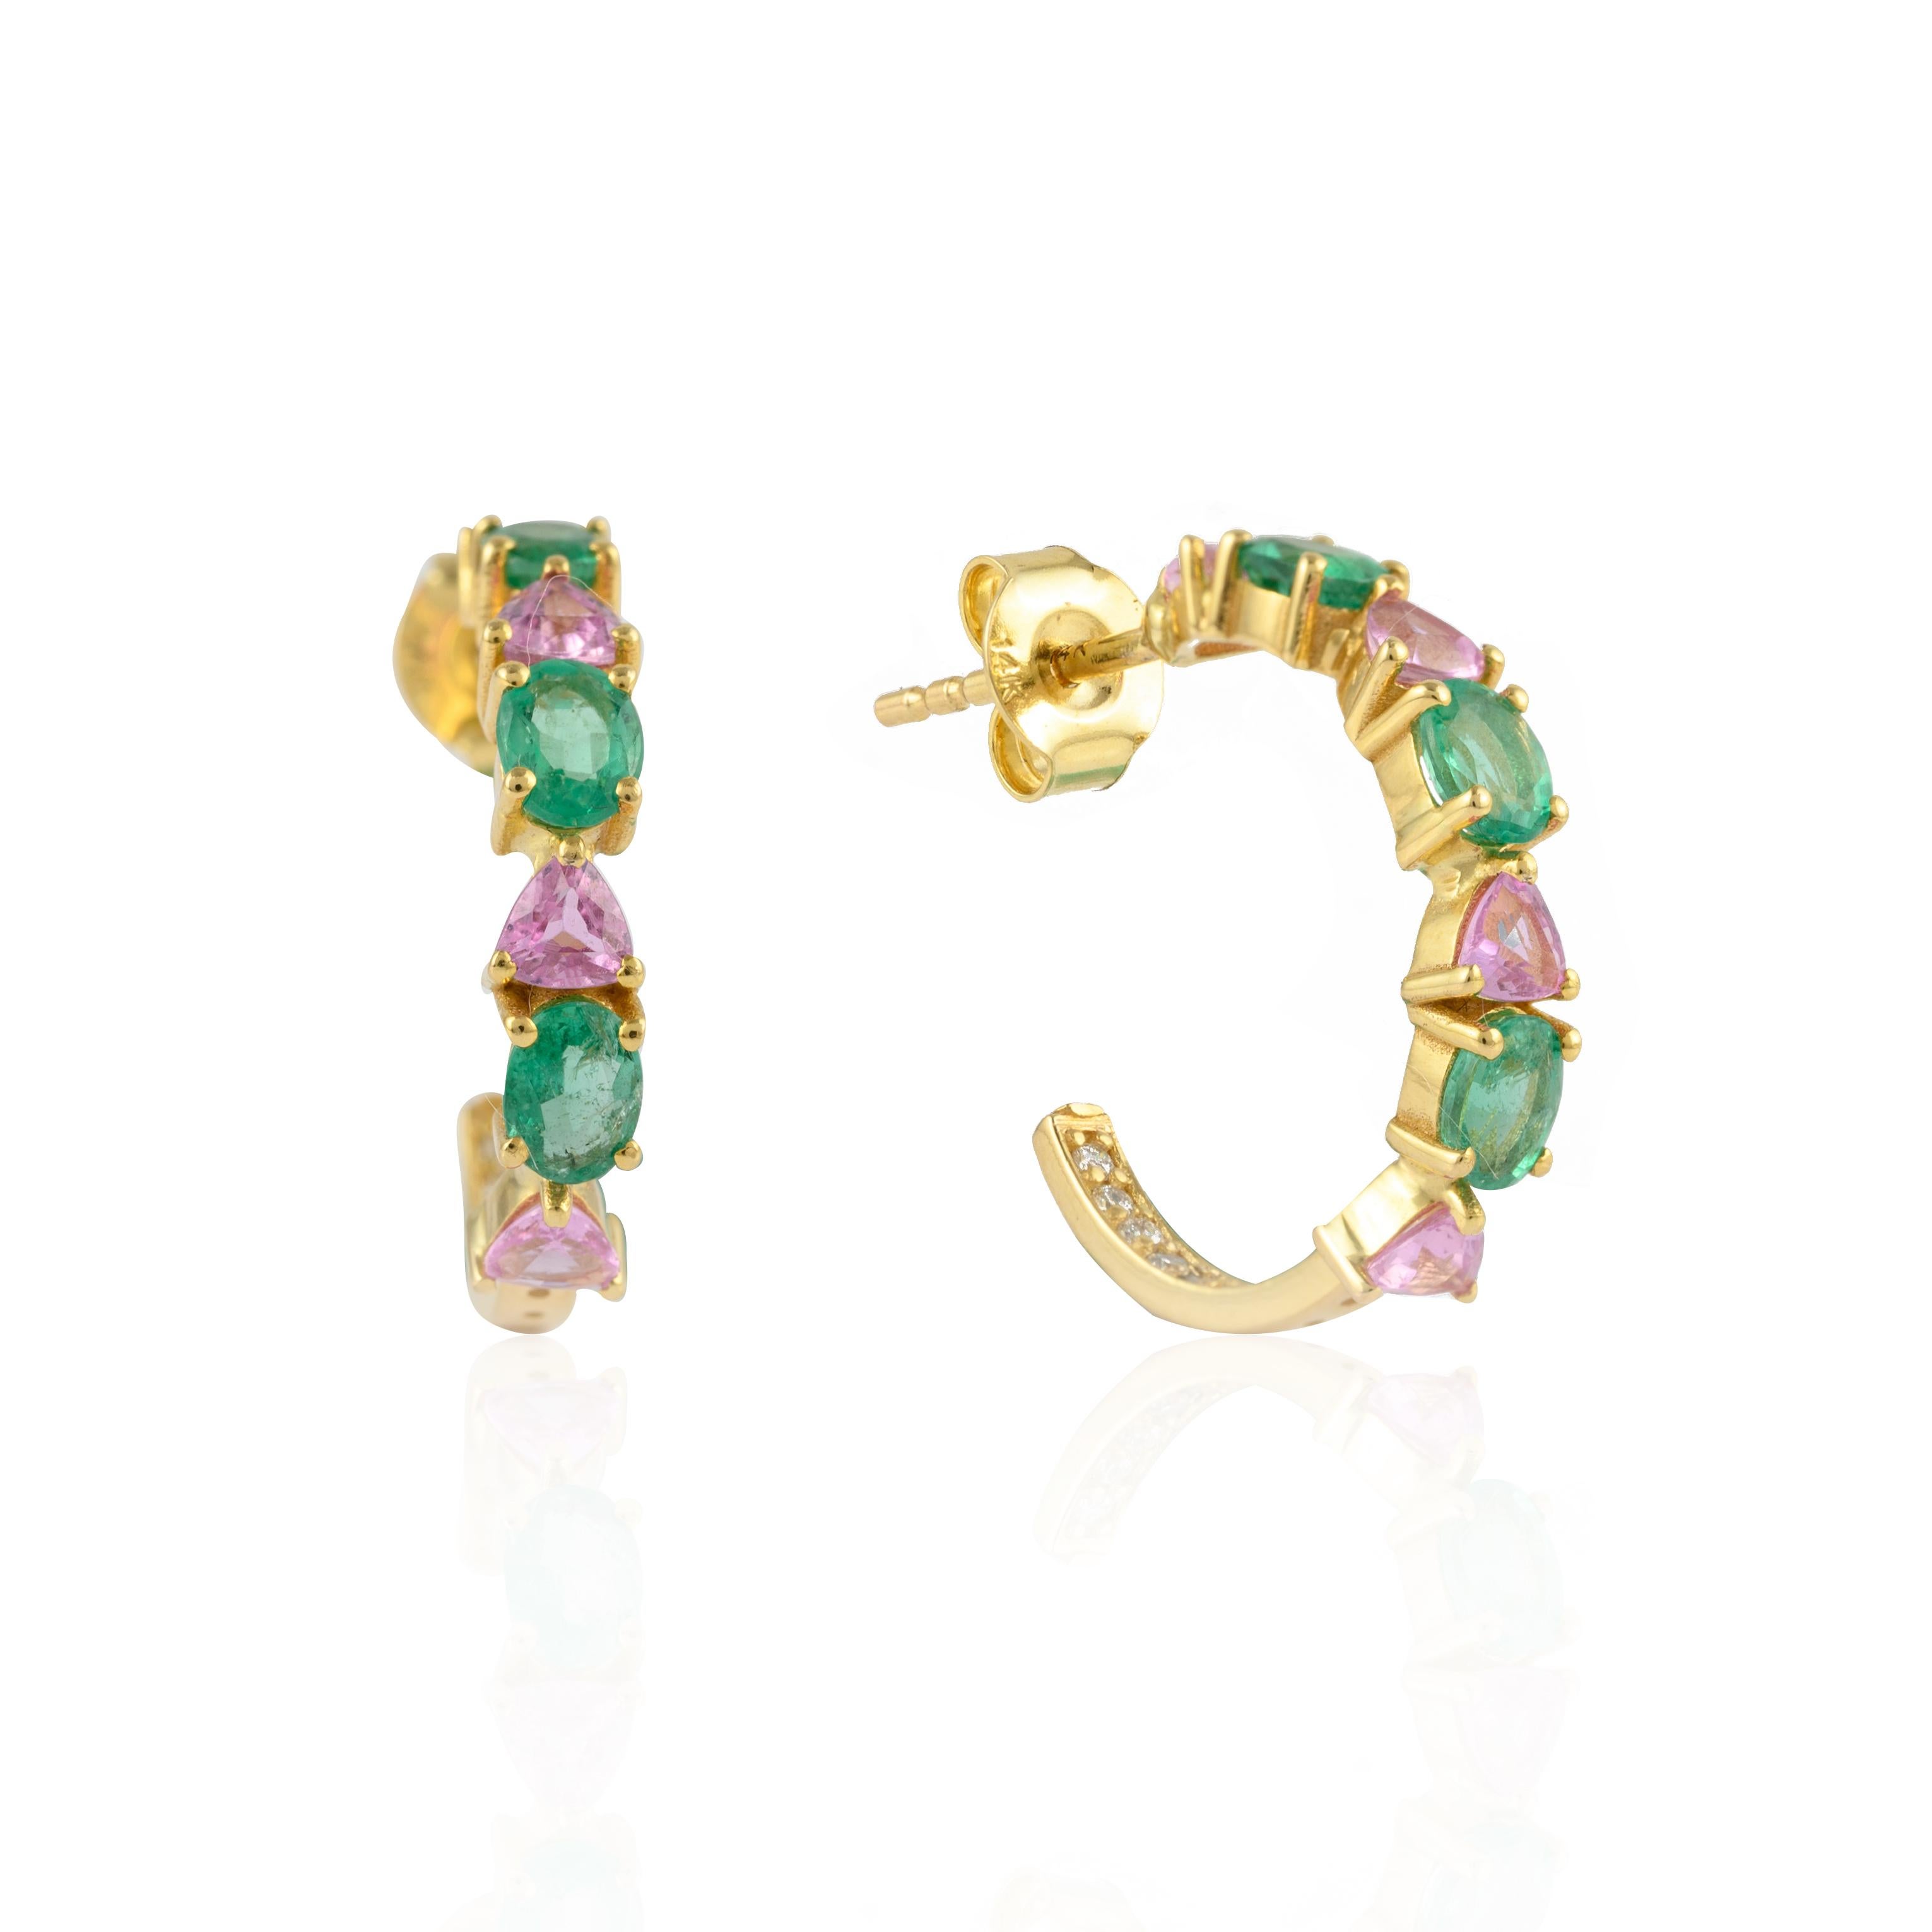 Minimalist 1.94 Carat Emerald Pink Sapphire Hoops Earring 14k Solid Yellow Gold In New Condition For Sale In Houston, TX